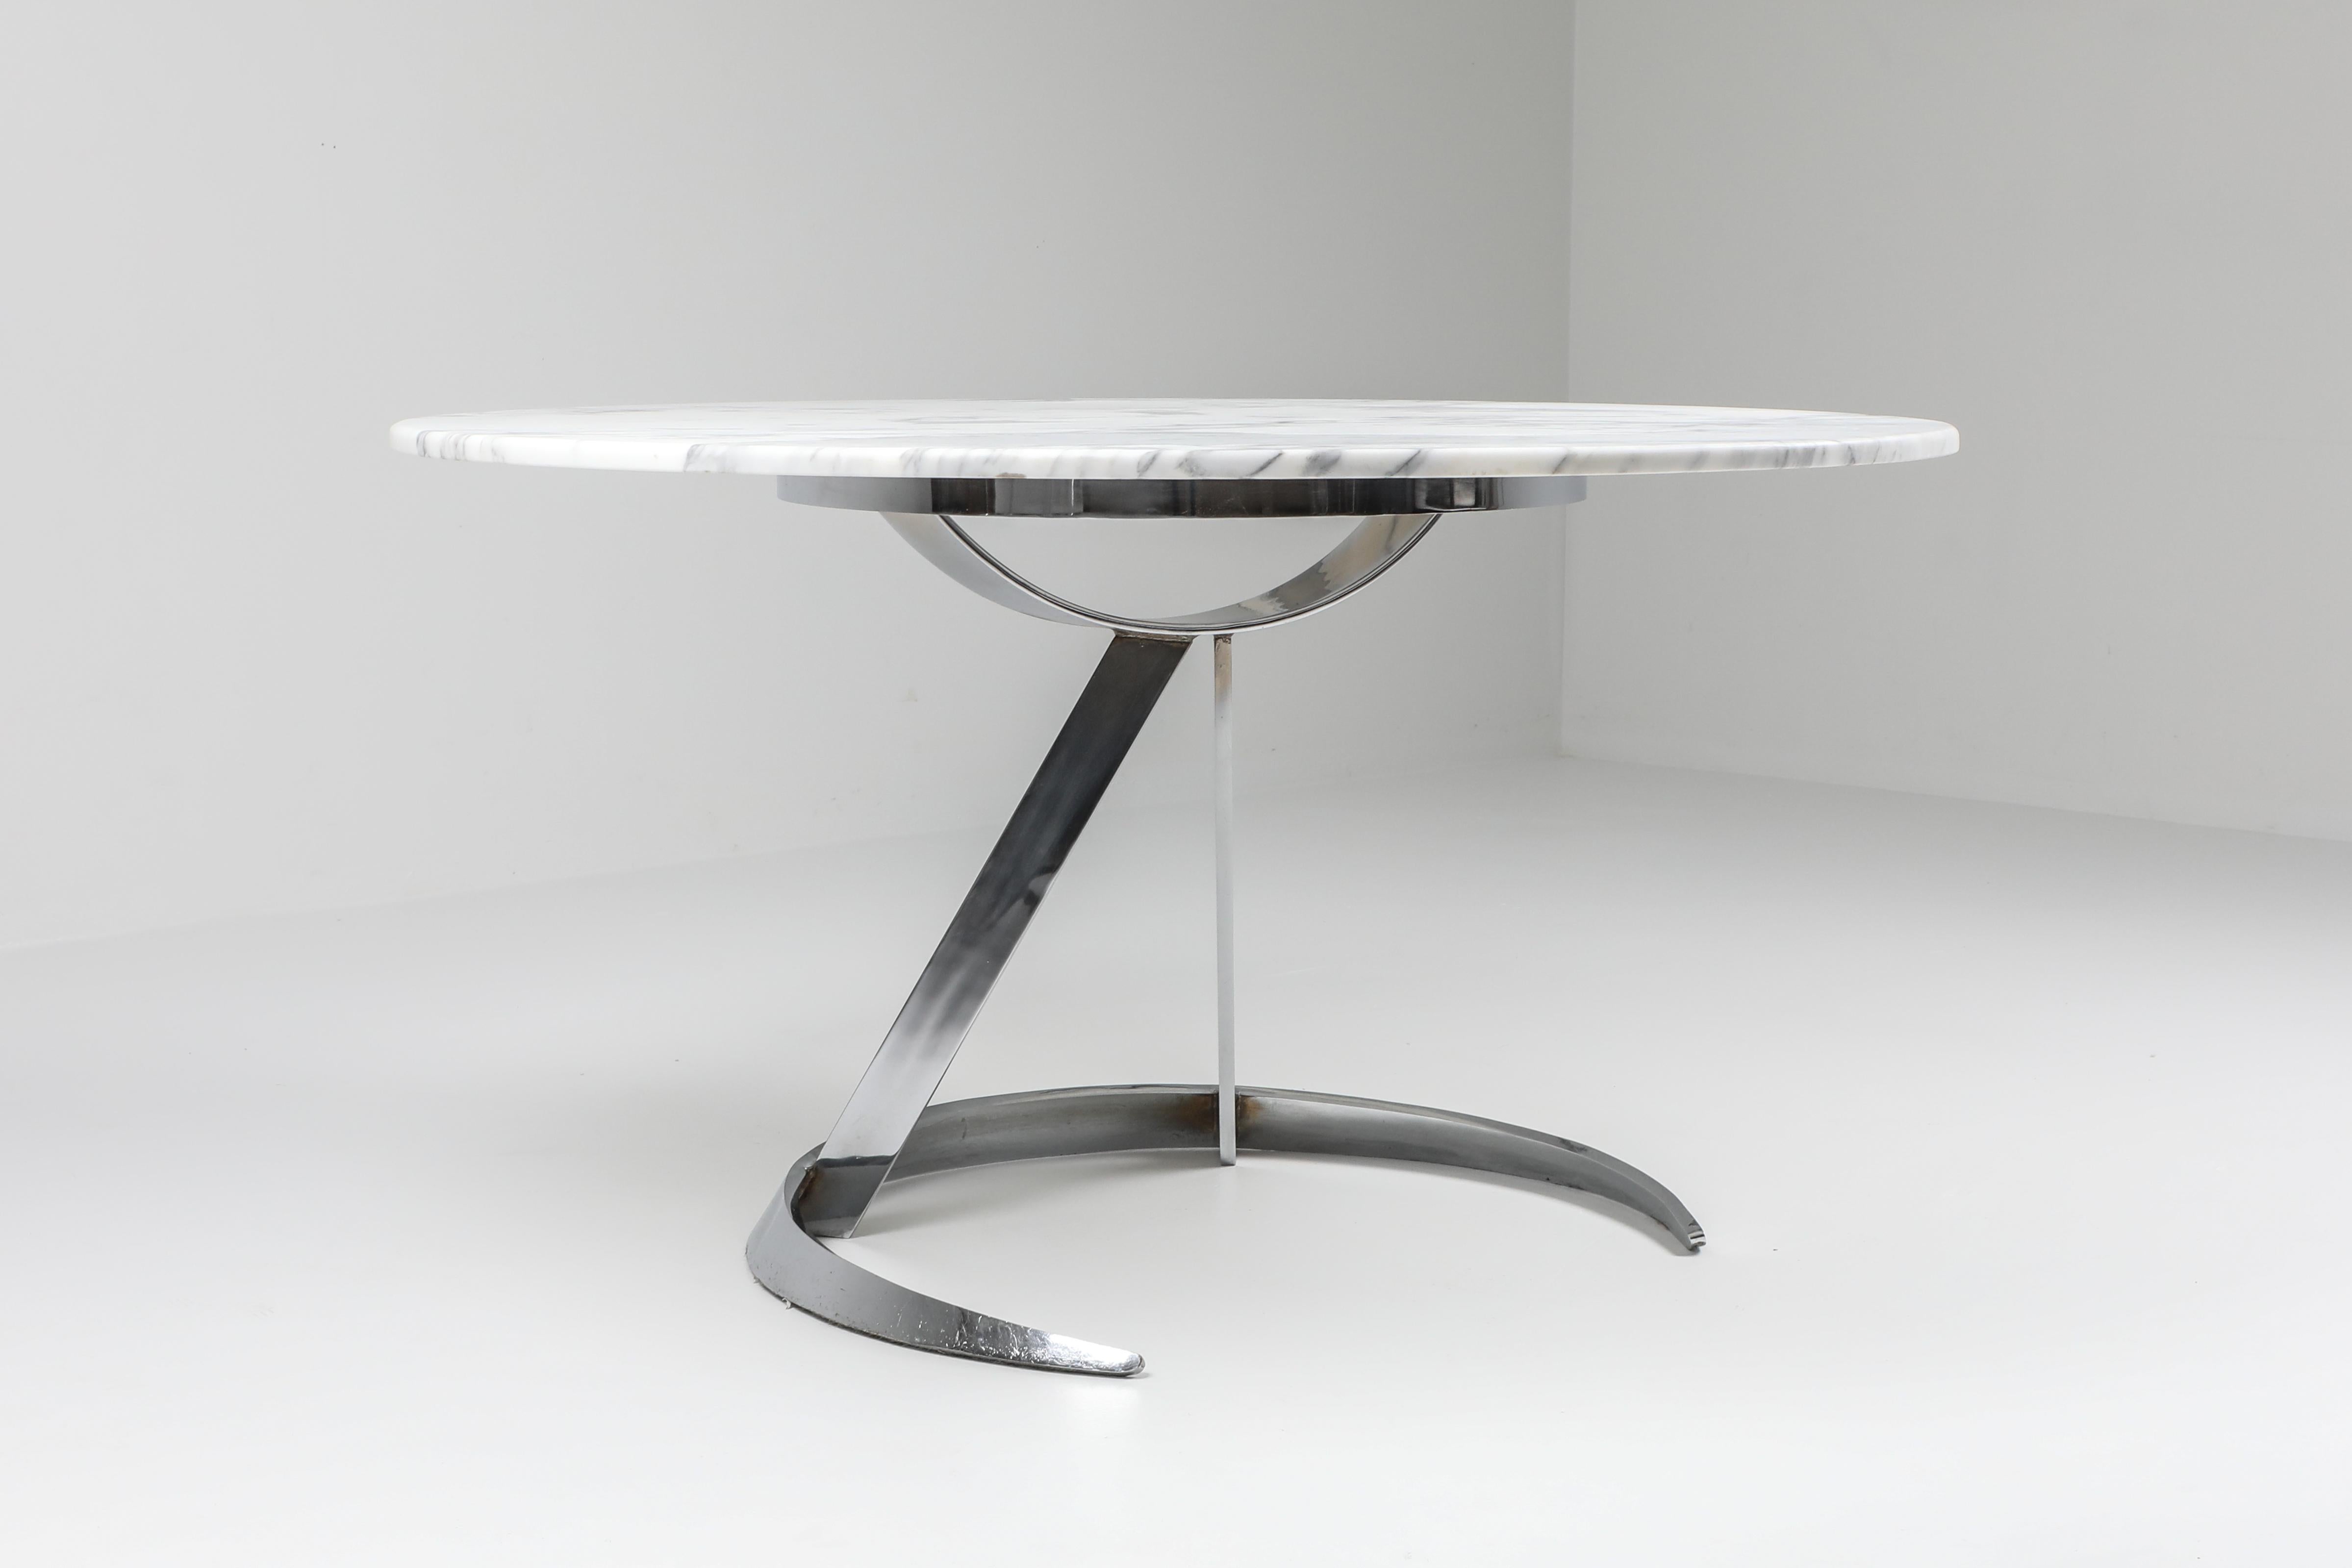 European Marble and Chrome Boris Tabaccof Dining Room Table For Sale